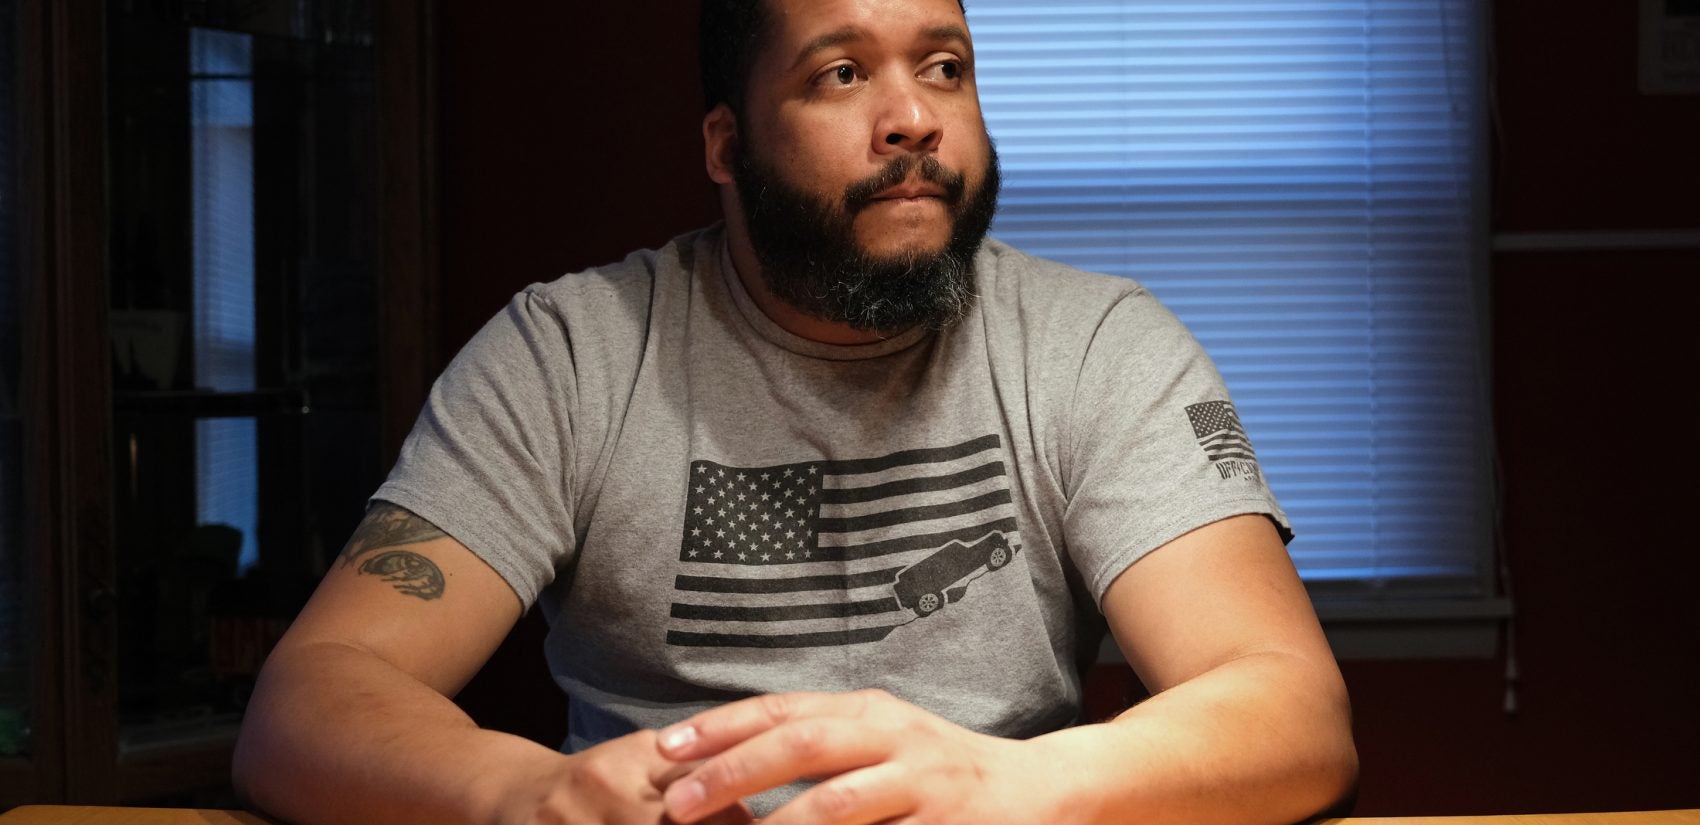 Ronald Stanley 'Stosh' Webb, Jr., at his home in Deer Lake, Pennsylvania. Webb was subjected to racial slurs while at Port Clinton Fire Company. (Matt Smith for Keystone Crossroads)